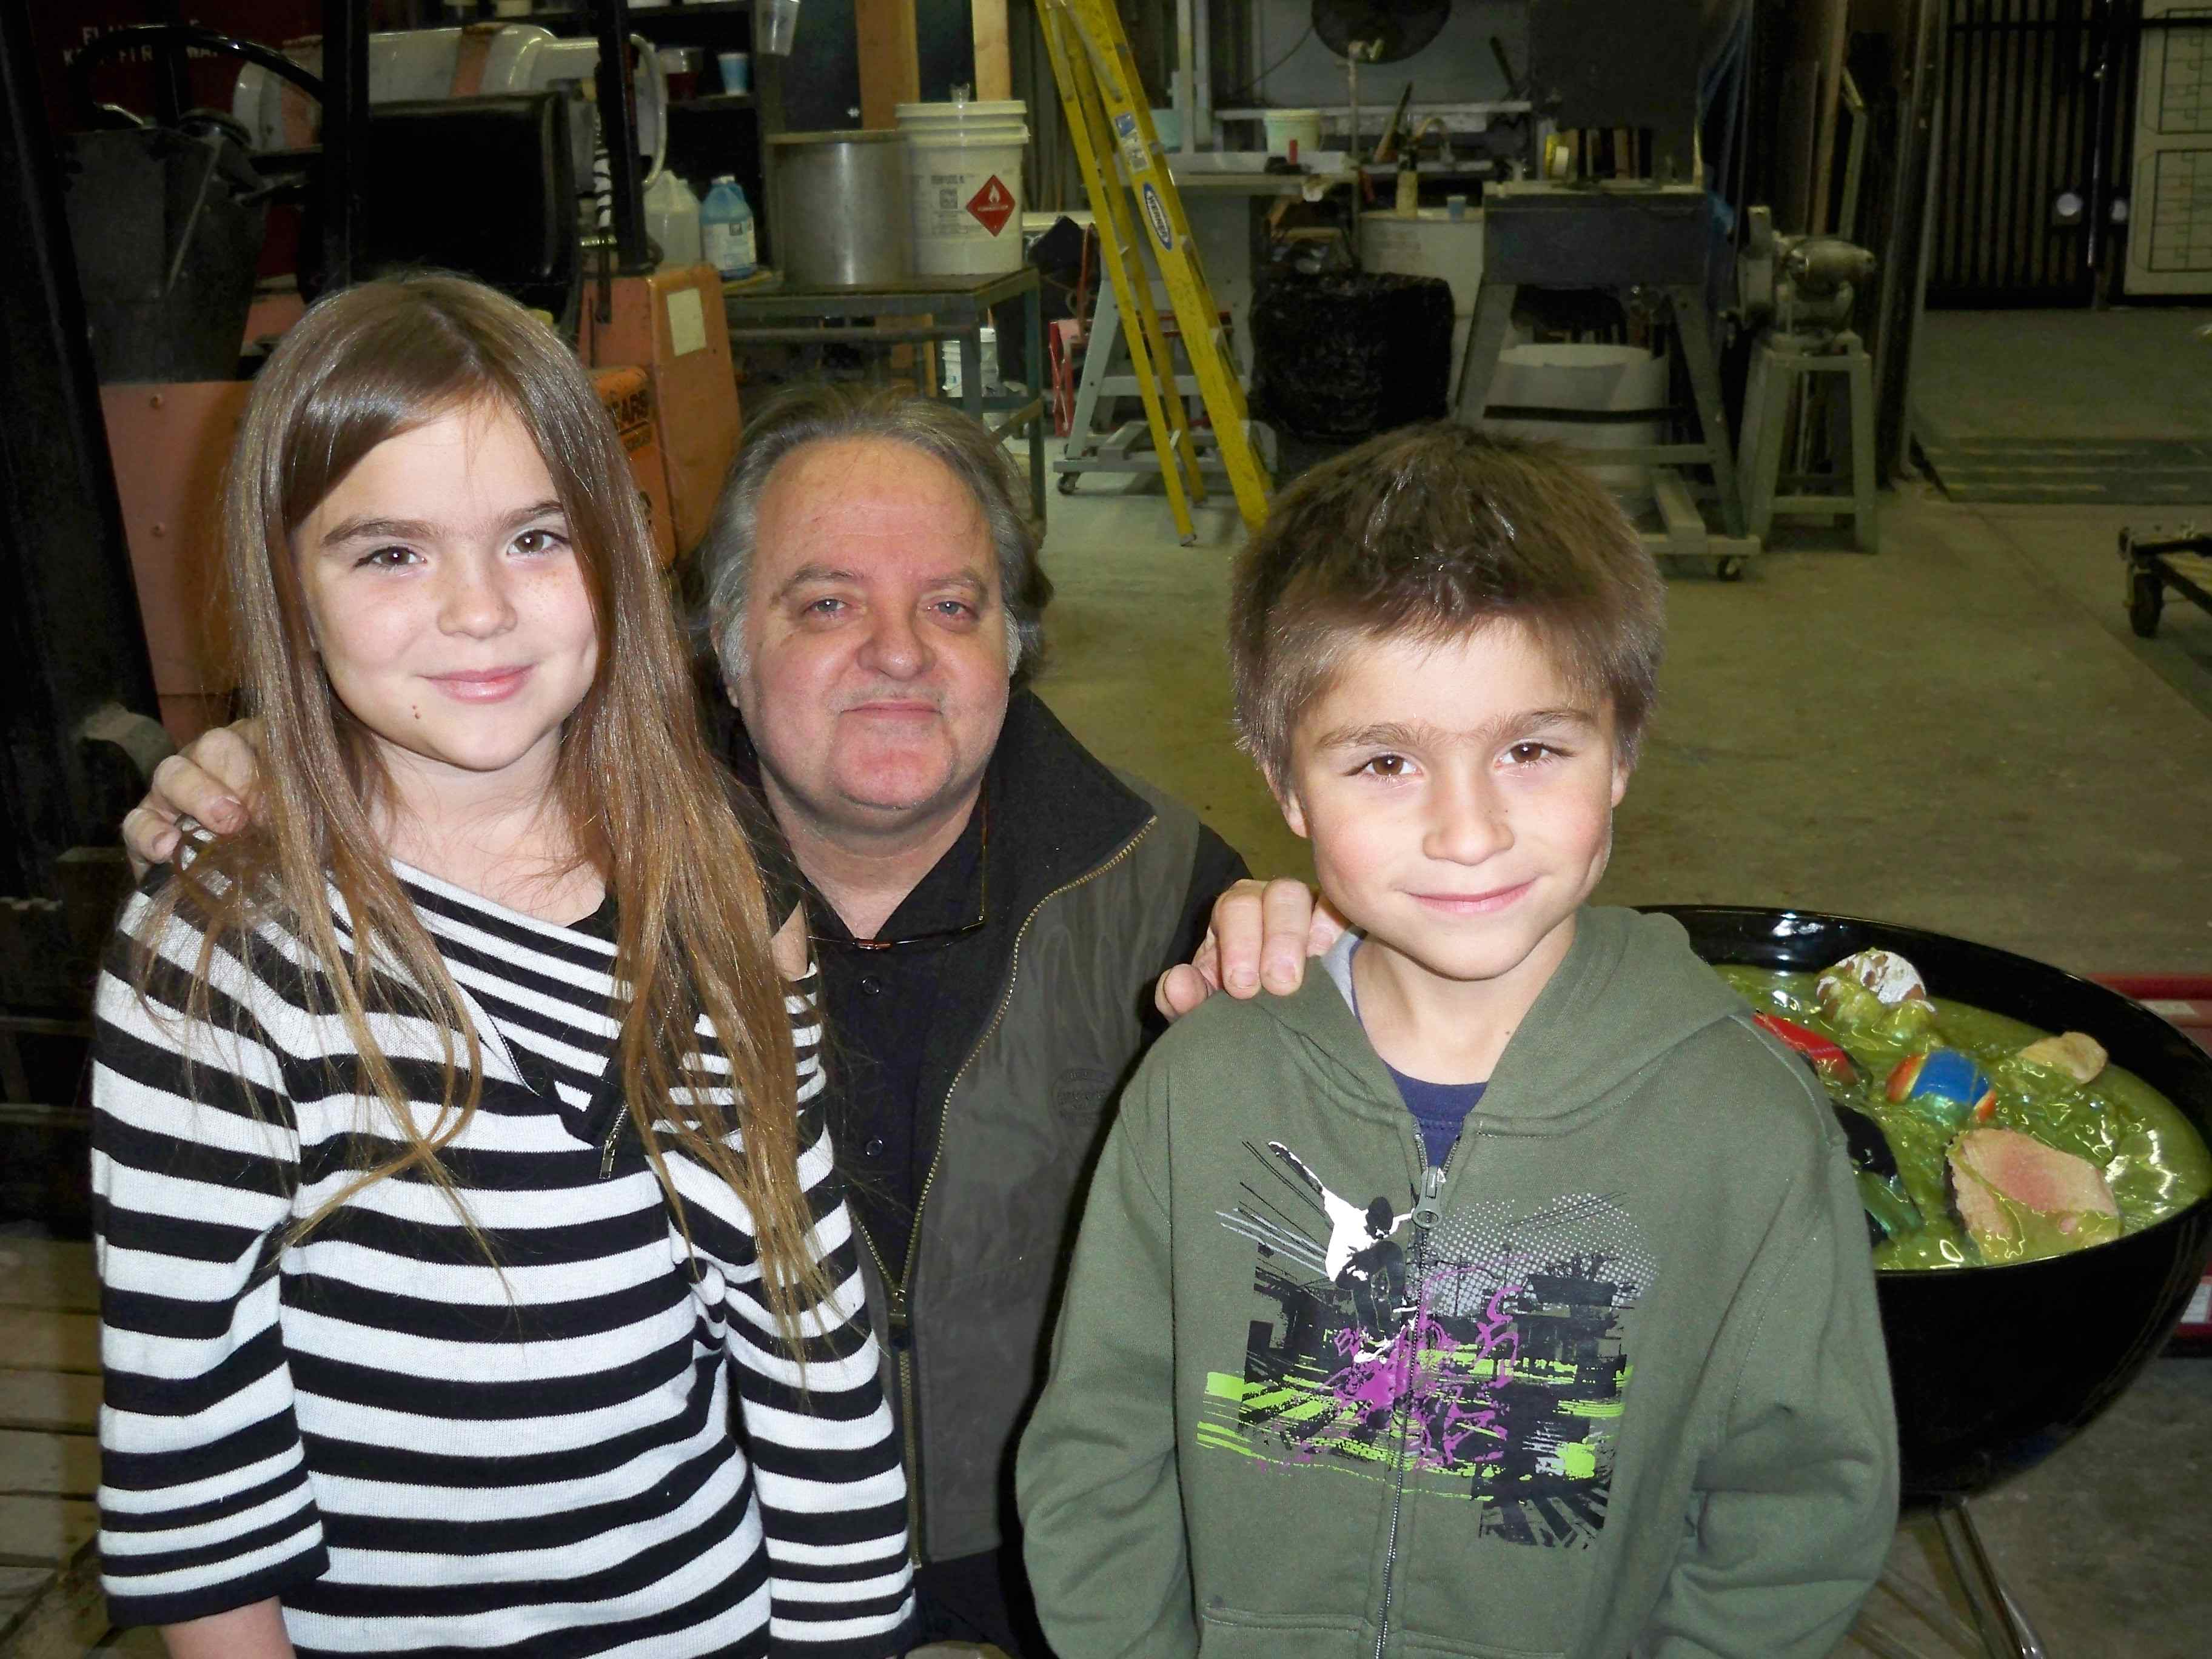 Stone & HannaH Eisenmann visiting CREATURE EFFECTS with Owner Mark Rappaport.One of their fav places to hang out.